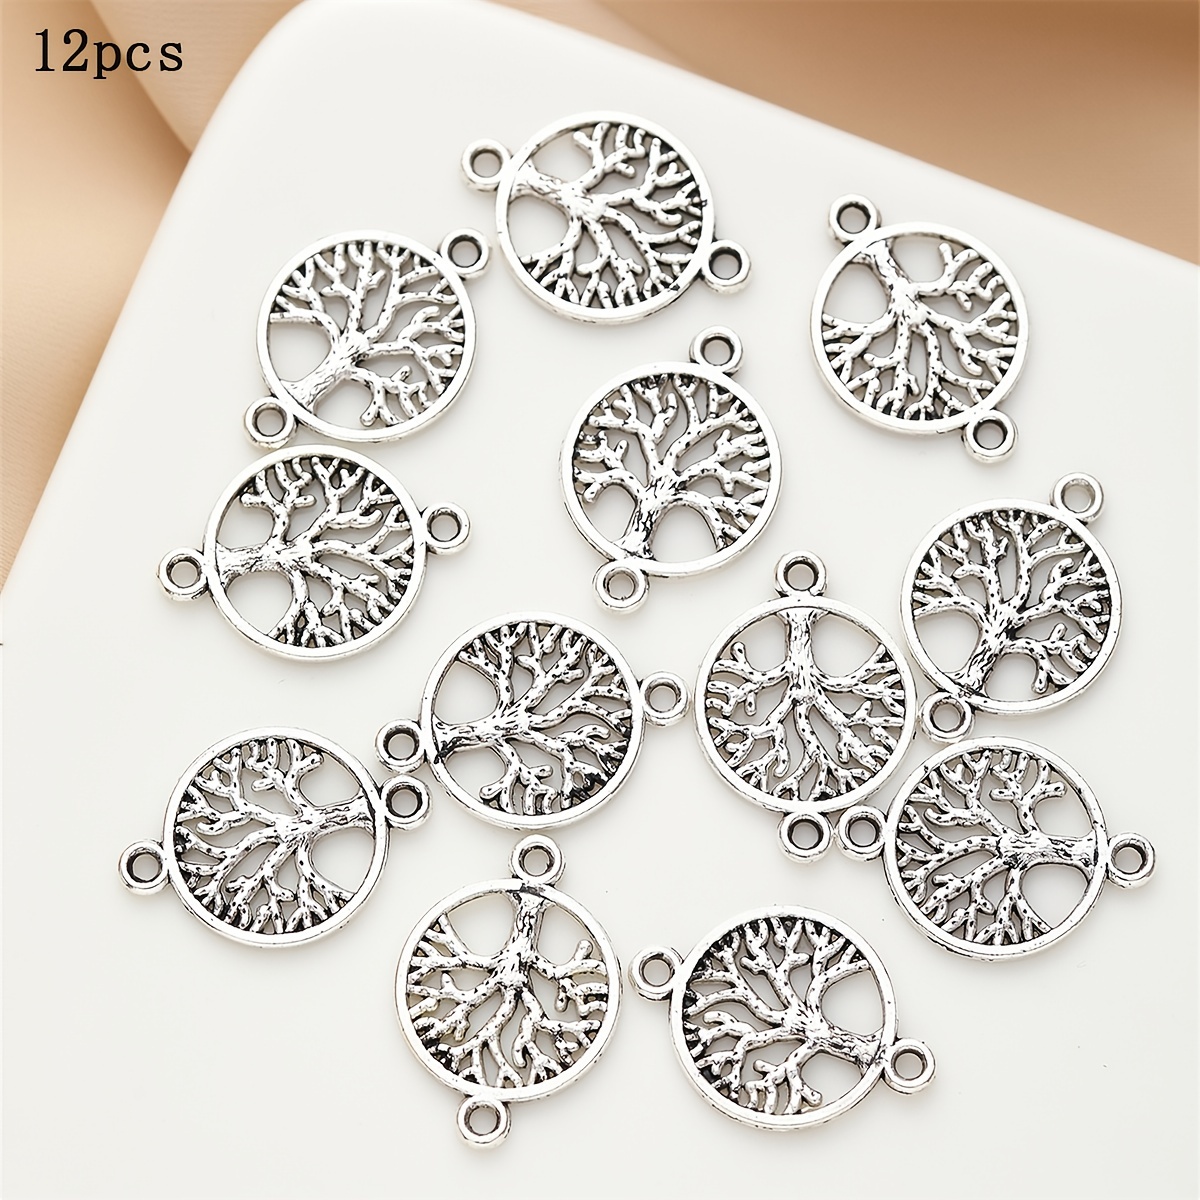 

12pcs Silvery Zinc Alloy Charms, Tree Of Life Design Hollow Round Connectors, For Jewelry Accessories Necklace Pendant Making